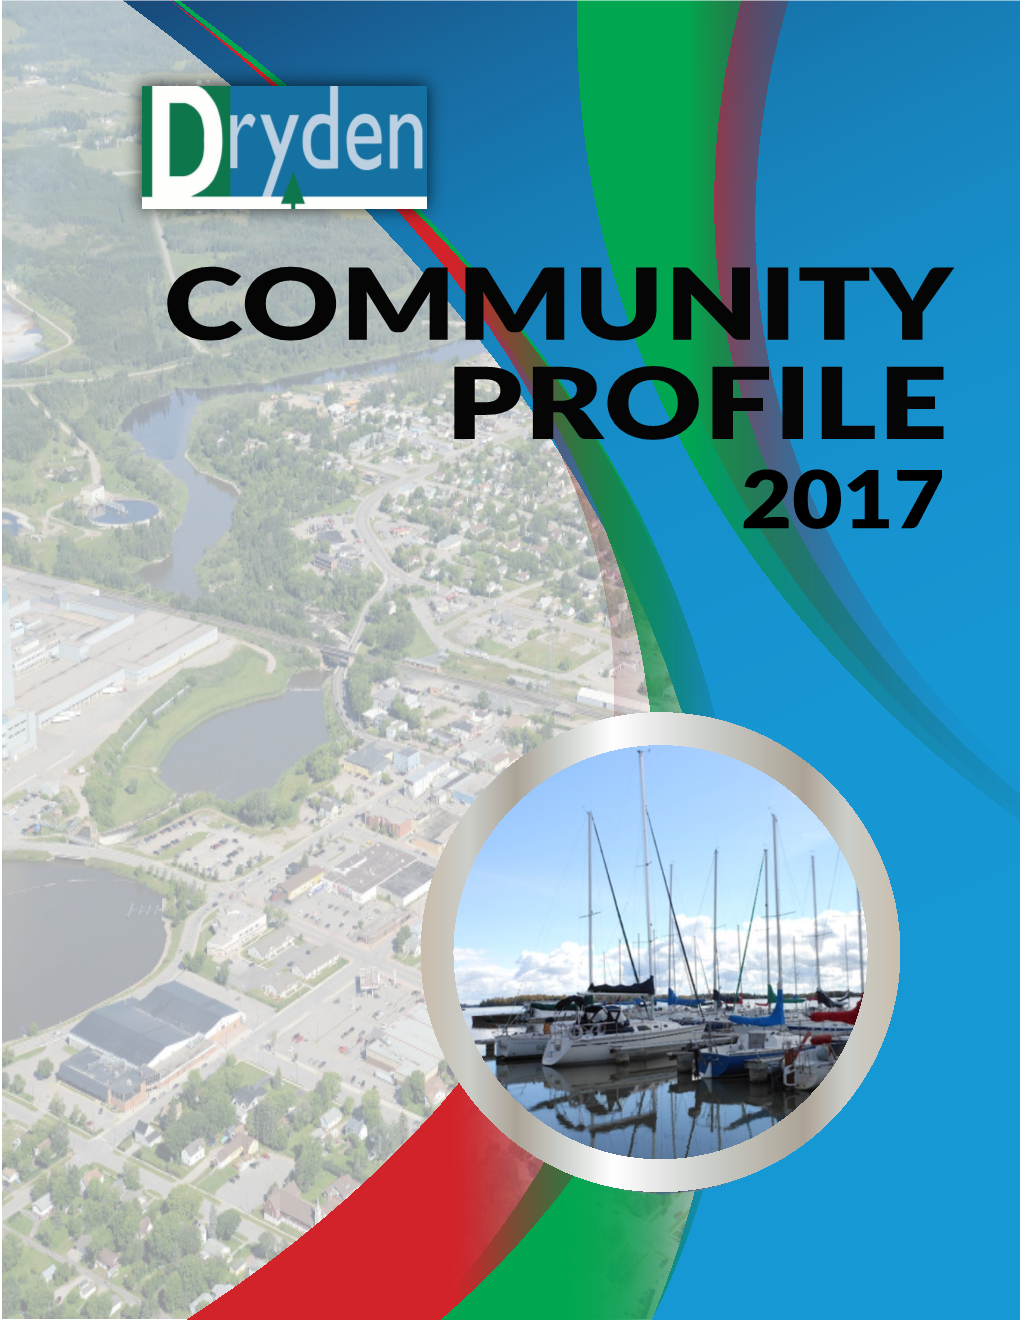 COMMUNITY PROFILE 2017 Version 6.0 March 15, 2017 © 2017 City of Dryden This Document Contains Information That Is Subject to Change Without Notice